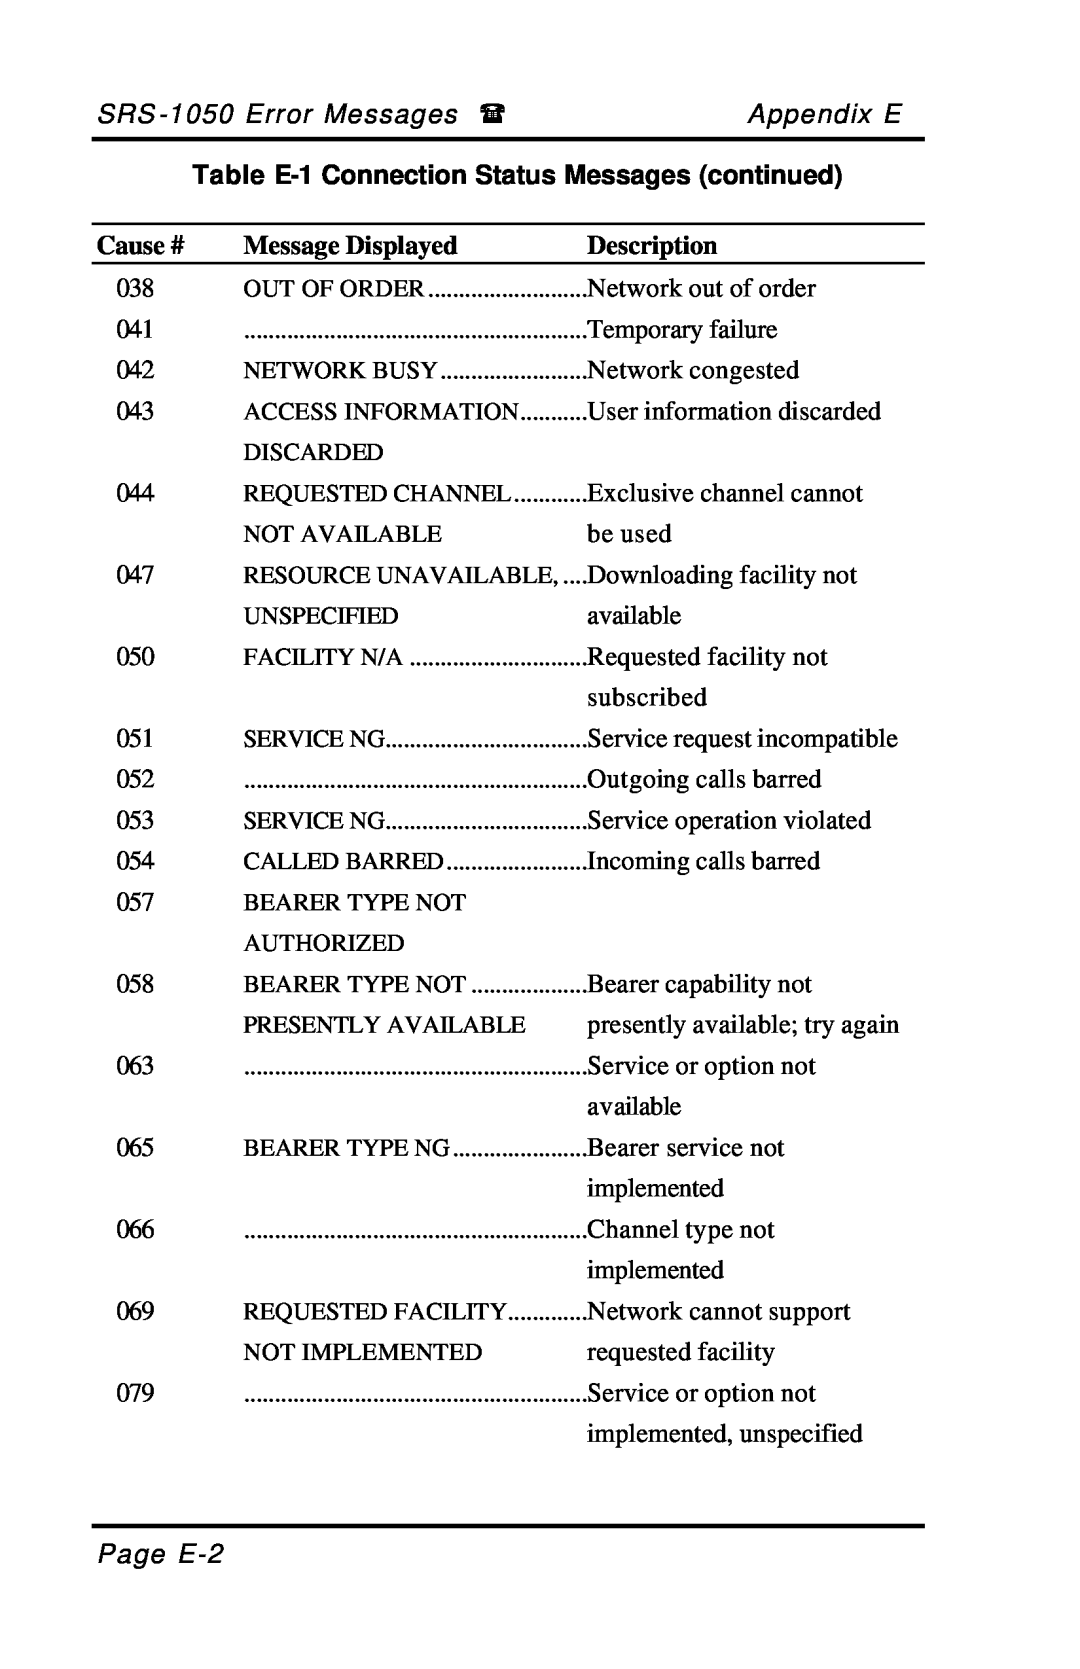 Fujitsu SRS-1050 manual Table E-1 Connection Status Messages continued 